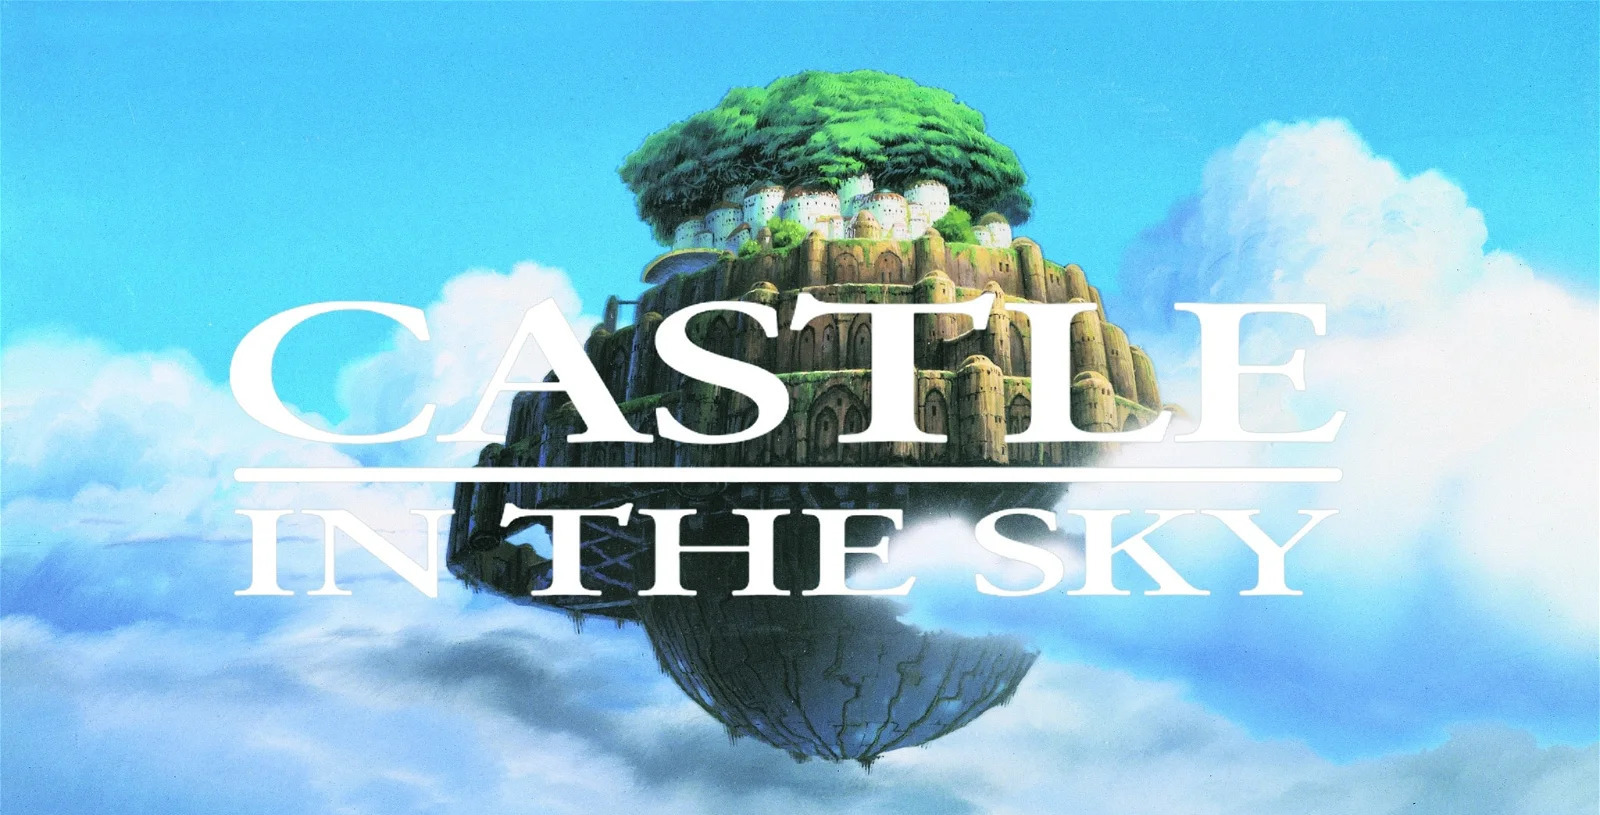 45-facts-about-the-movie-castle-in-the-sky